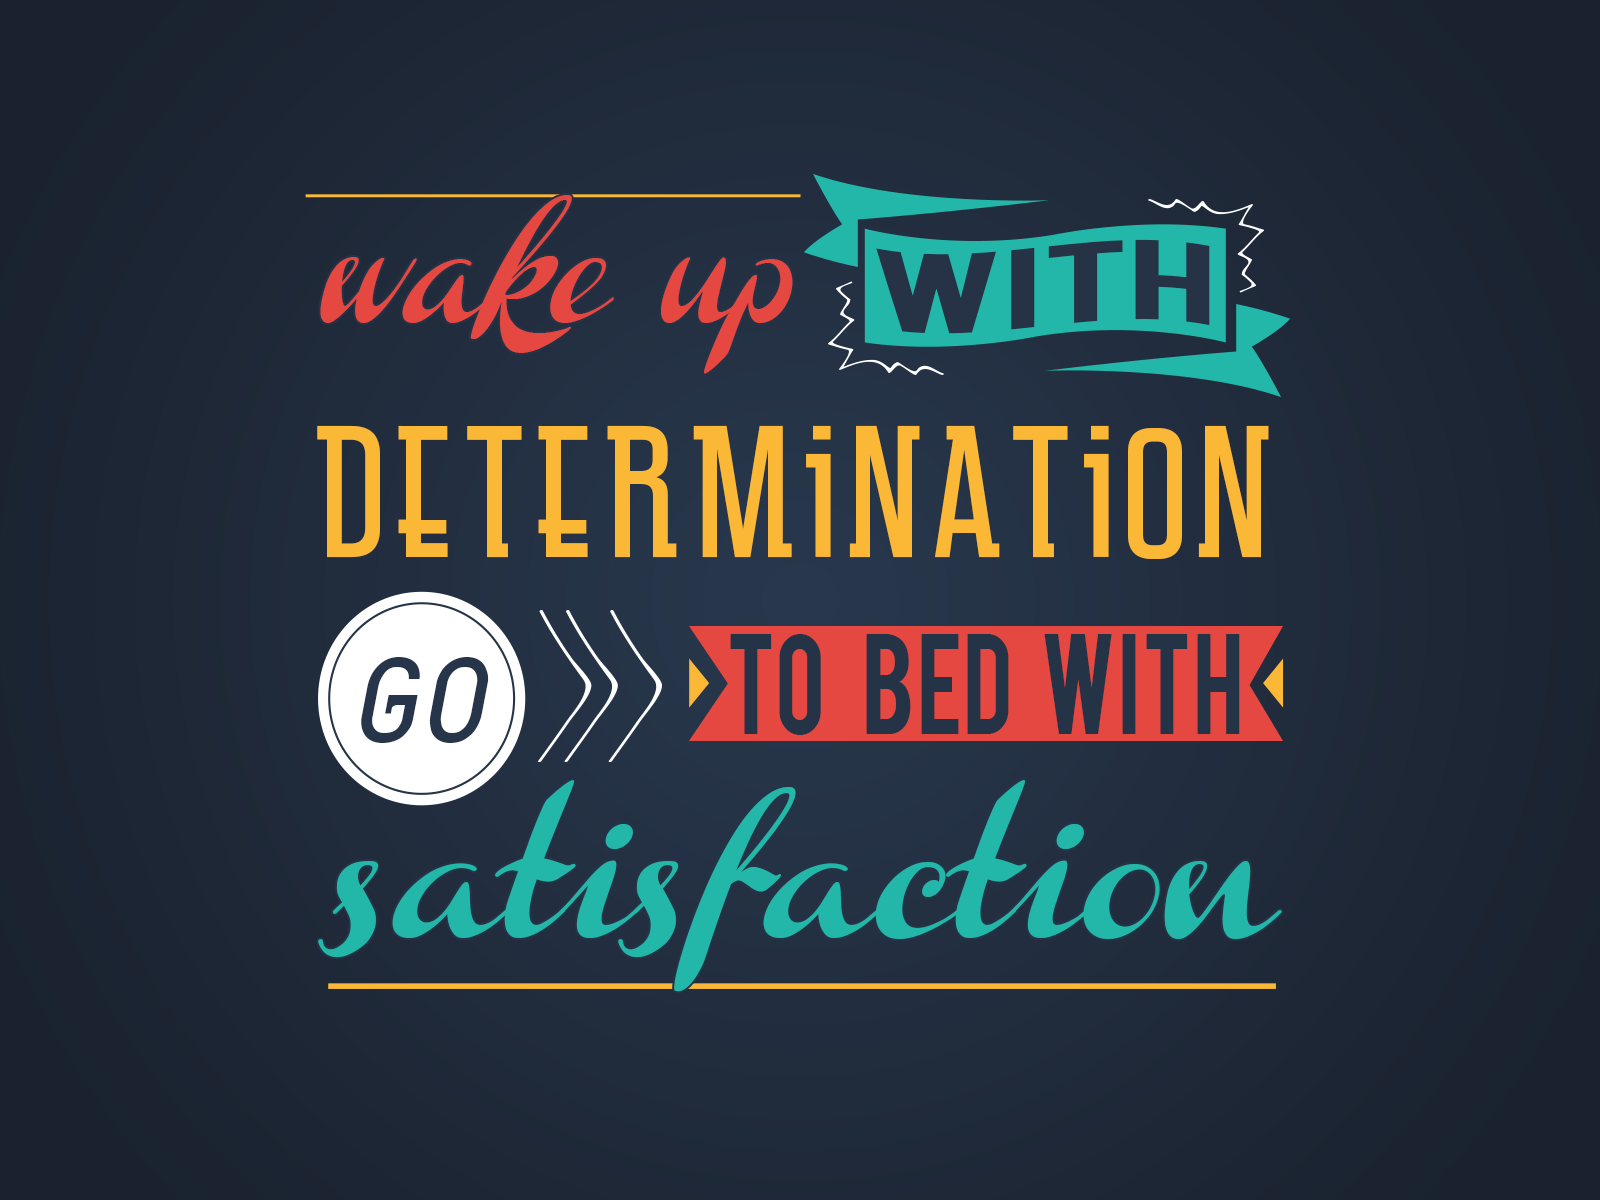 Wake up with determination Go to bed with satisfaction. Motivation, Study motivation, Positive thoughts